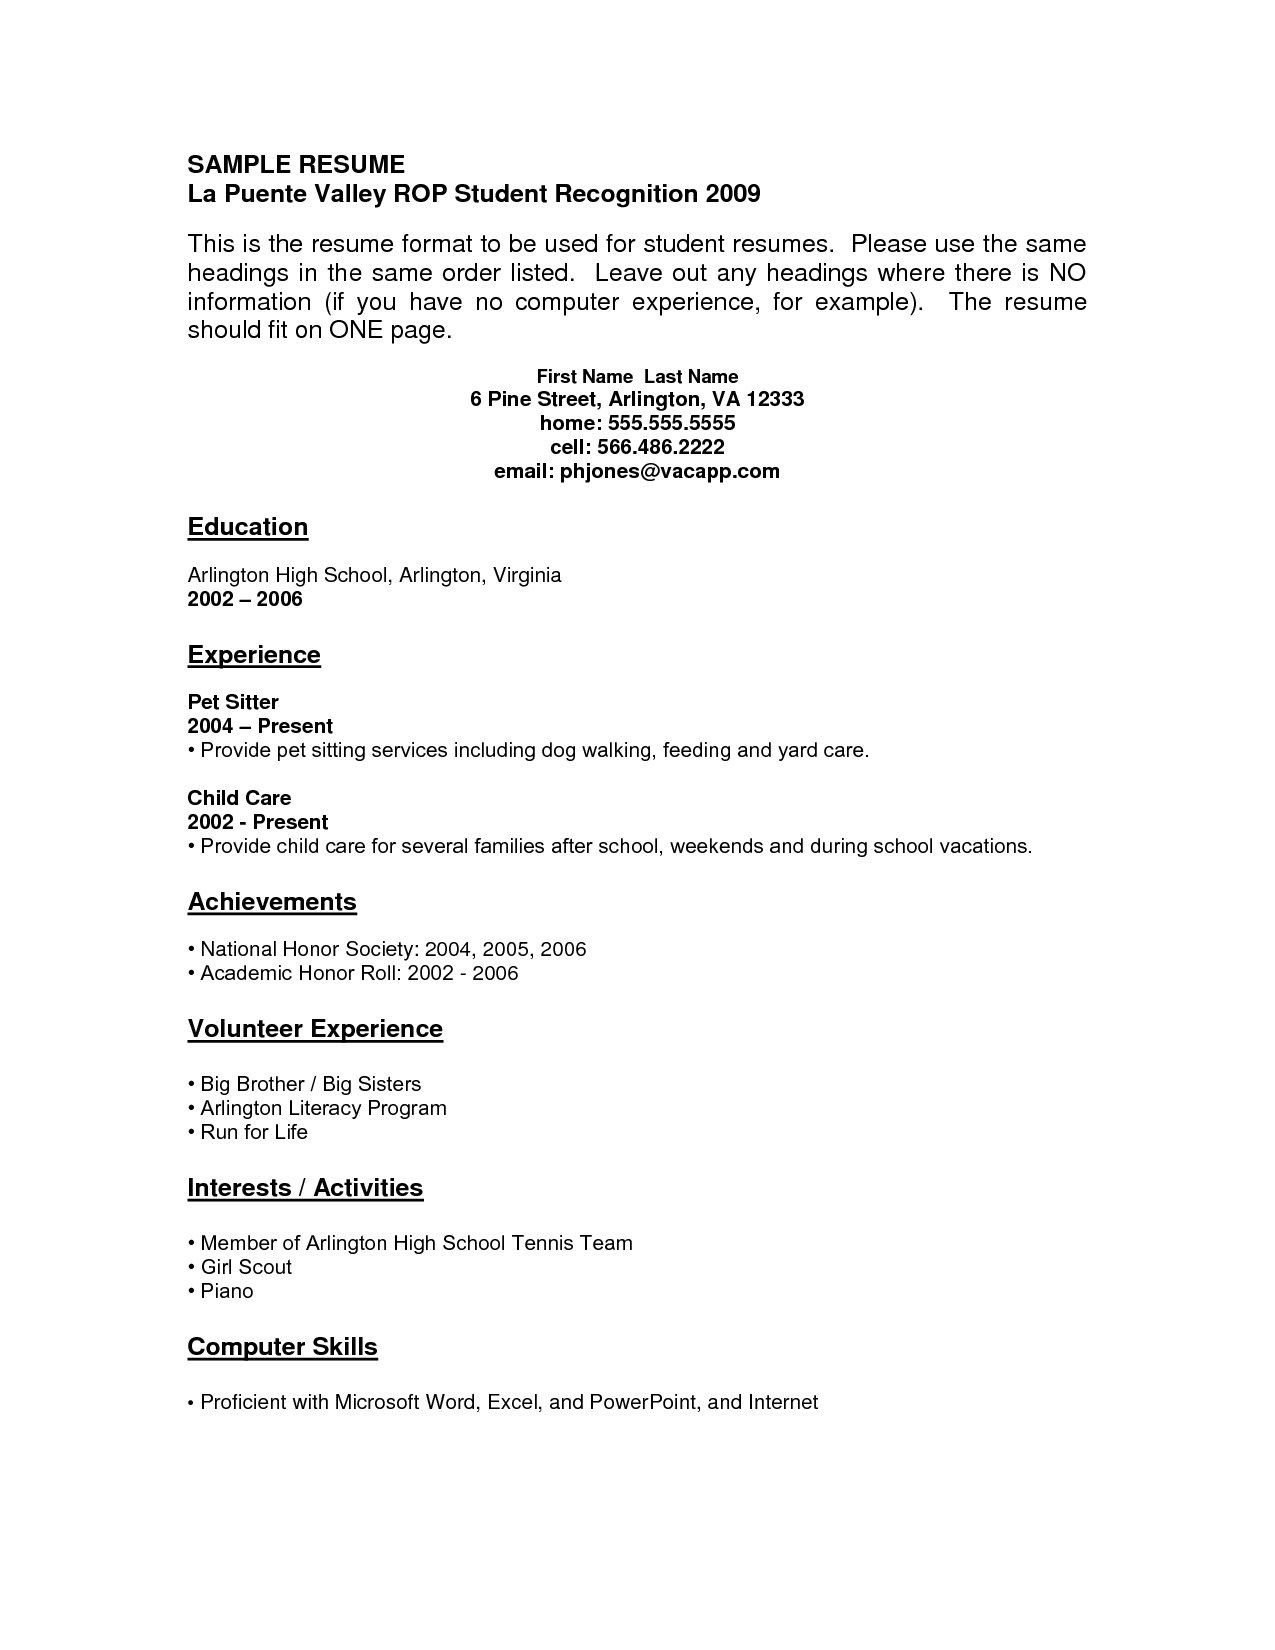 Free Resume Samples for Highschool Students Resume Examples with No Job Experience – Resume Templates Job …